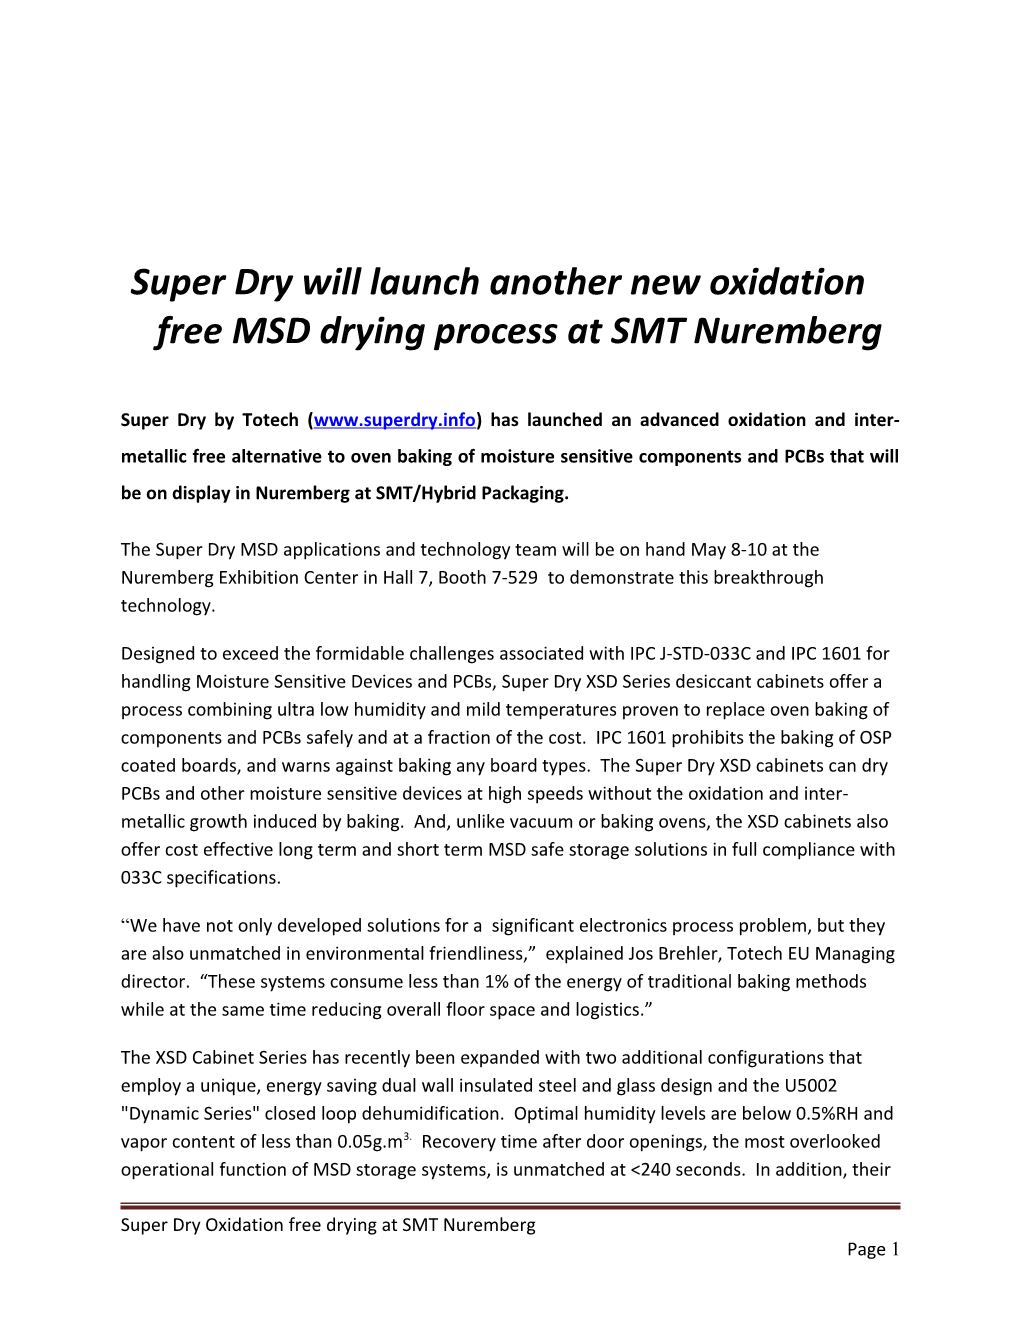 Super Dry Will Launch Another New Oxidation Free MSD Drying Process at SMT Nuremberg